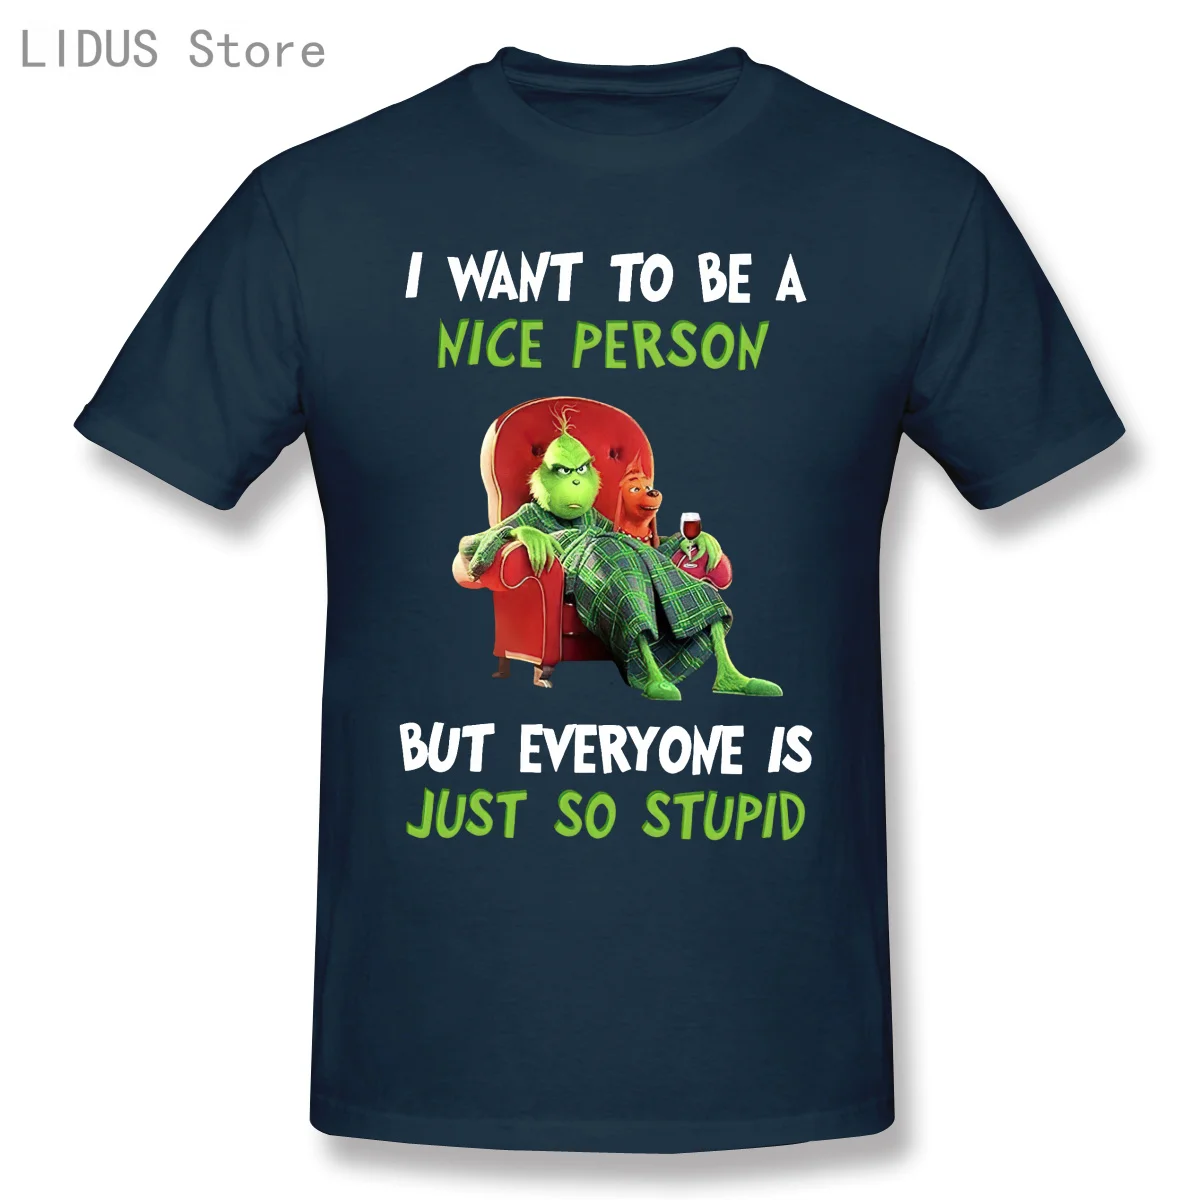 I Want To Be A Nice Person But Everyoneis Just So Stupid. Funny Grinch T-Shirt. Cotton Short Sleeve O-Neck Unisex T Shirt